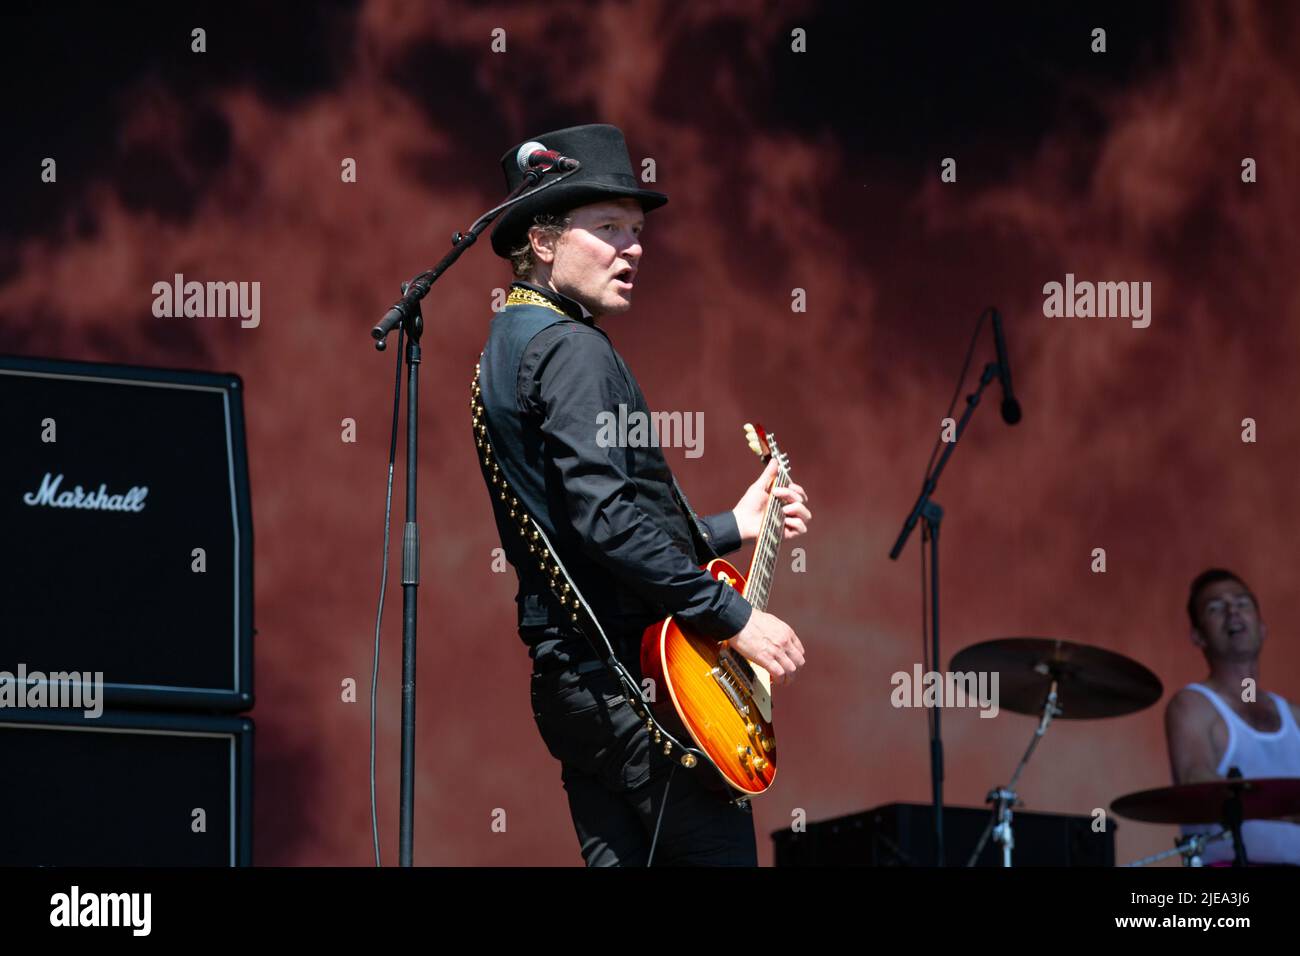 Oslo, Norway. 24th, June 2022. The Danish rock band D-A-D performs a live concert during the Norwegian music festival Tons of Rock 2022 in Oslo. Here guitarist Jacob Binzer is seen live on stage. (Photo credit: Gonzales Photo - Per-Otto Oppi). Stock Photo